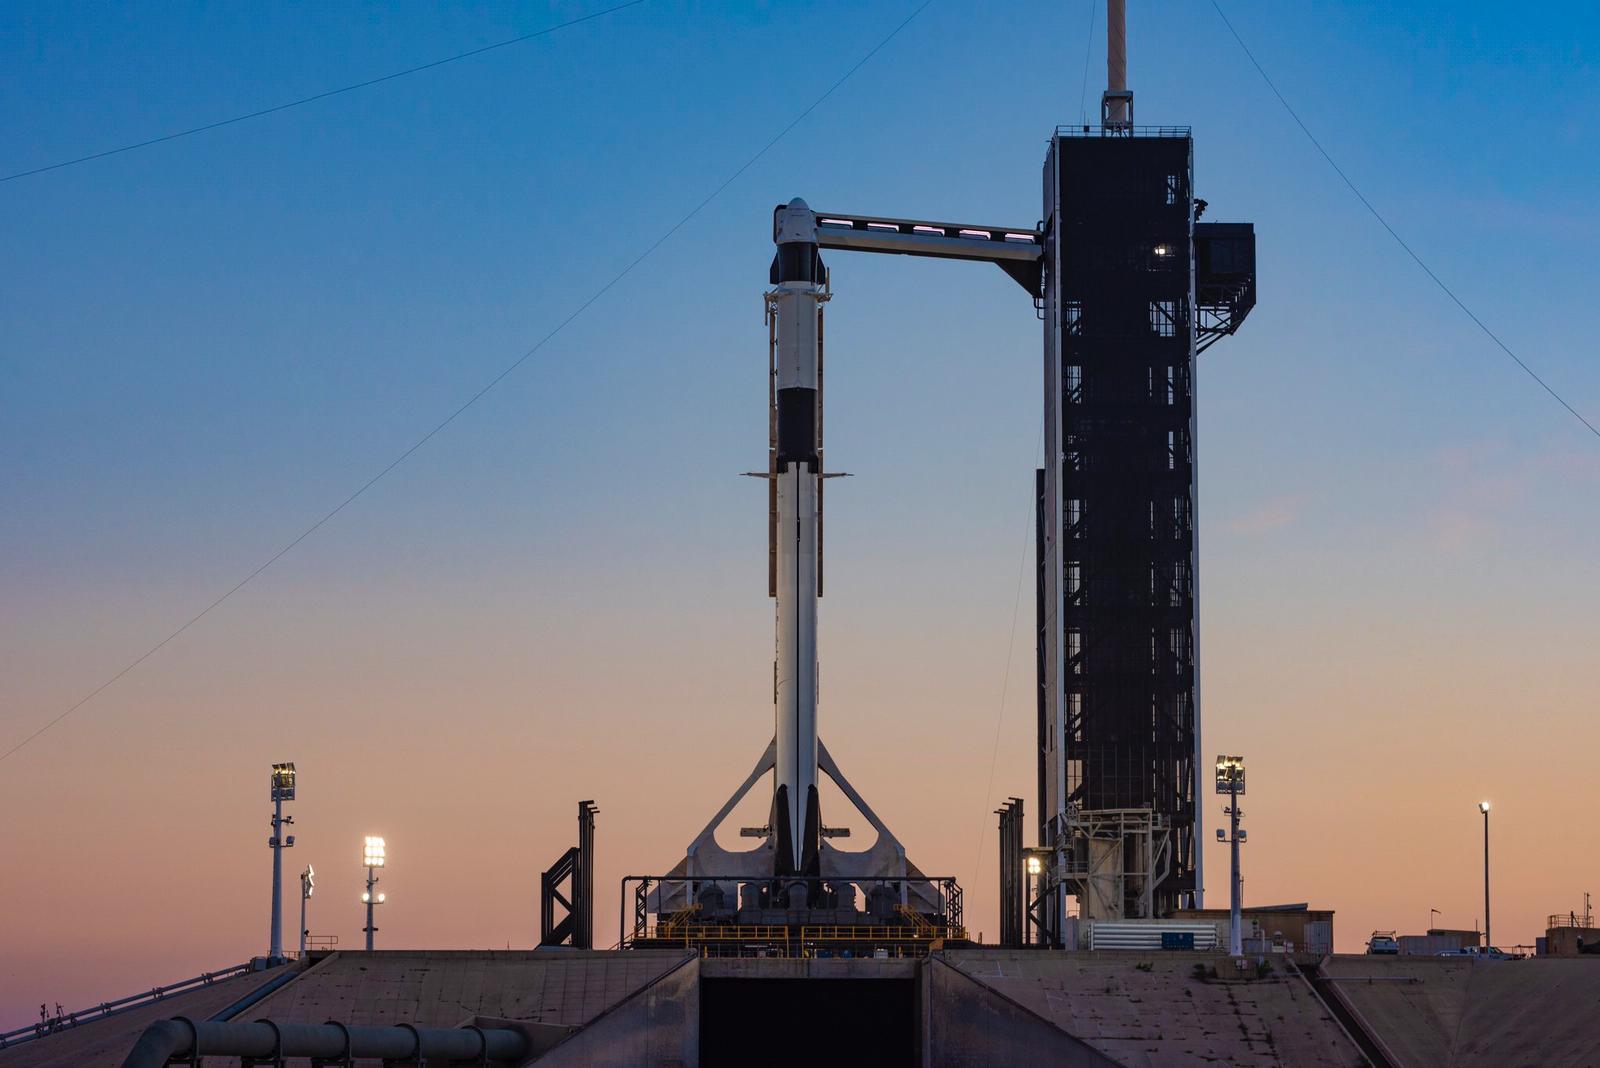 SpaceX, NASA set to launch space capsule on Mar 2